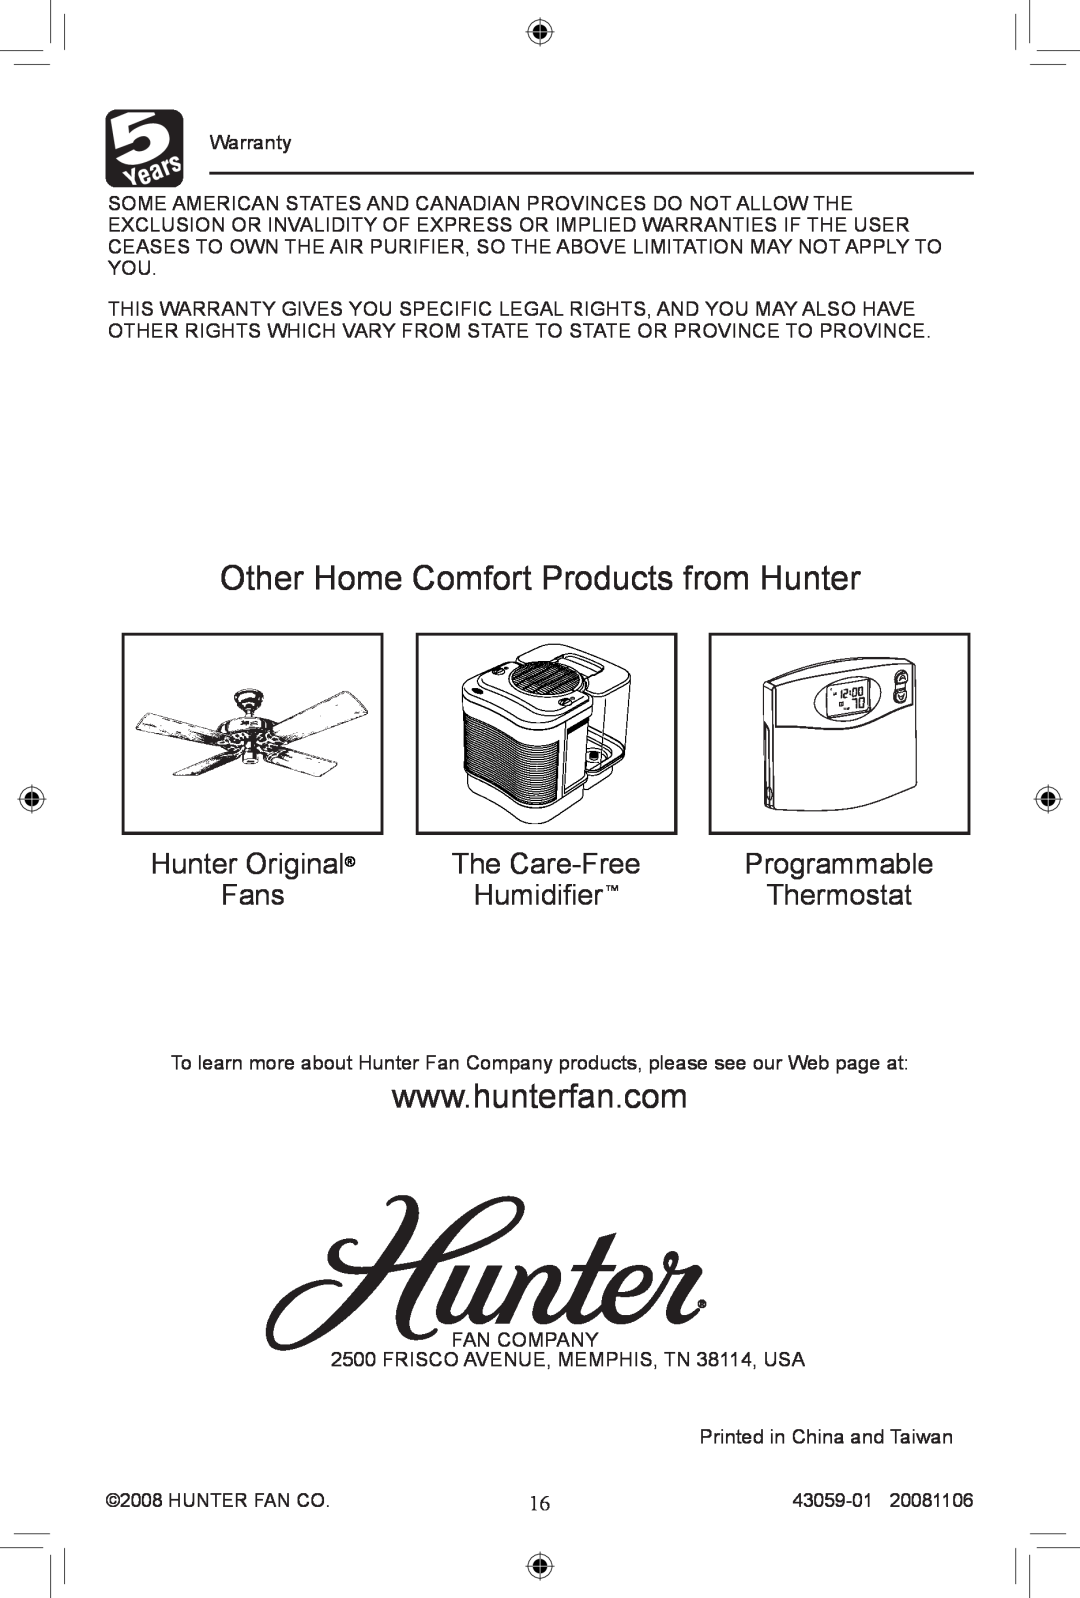 Hunter Fan 30770, 30771 manual Hunter Original, The Care-Free, Programmable, Fans, Humidifier, Thermostat 